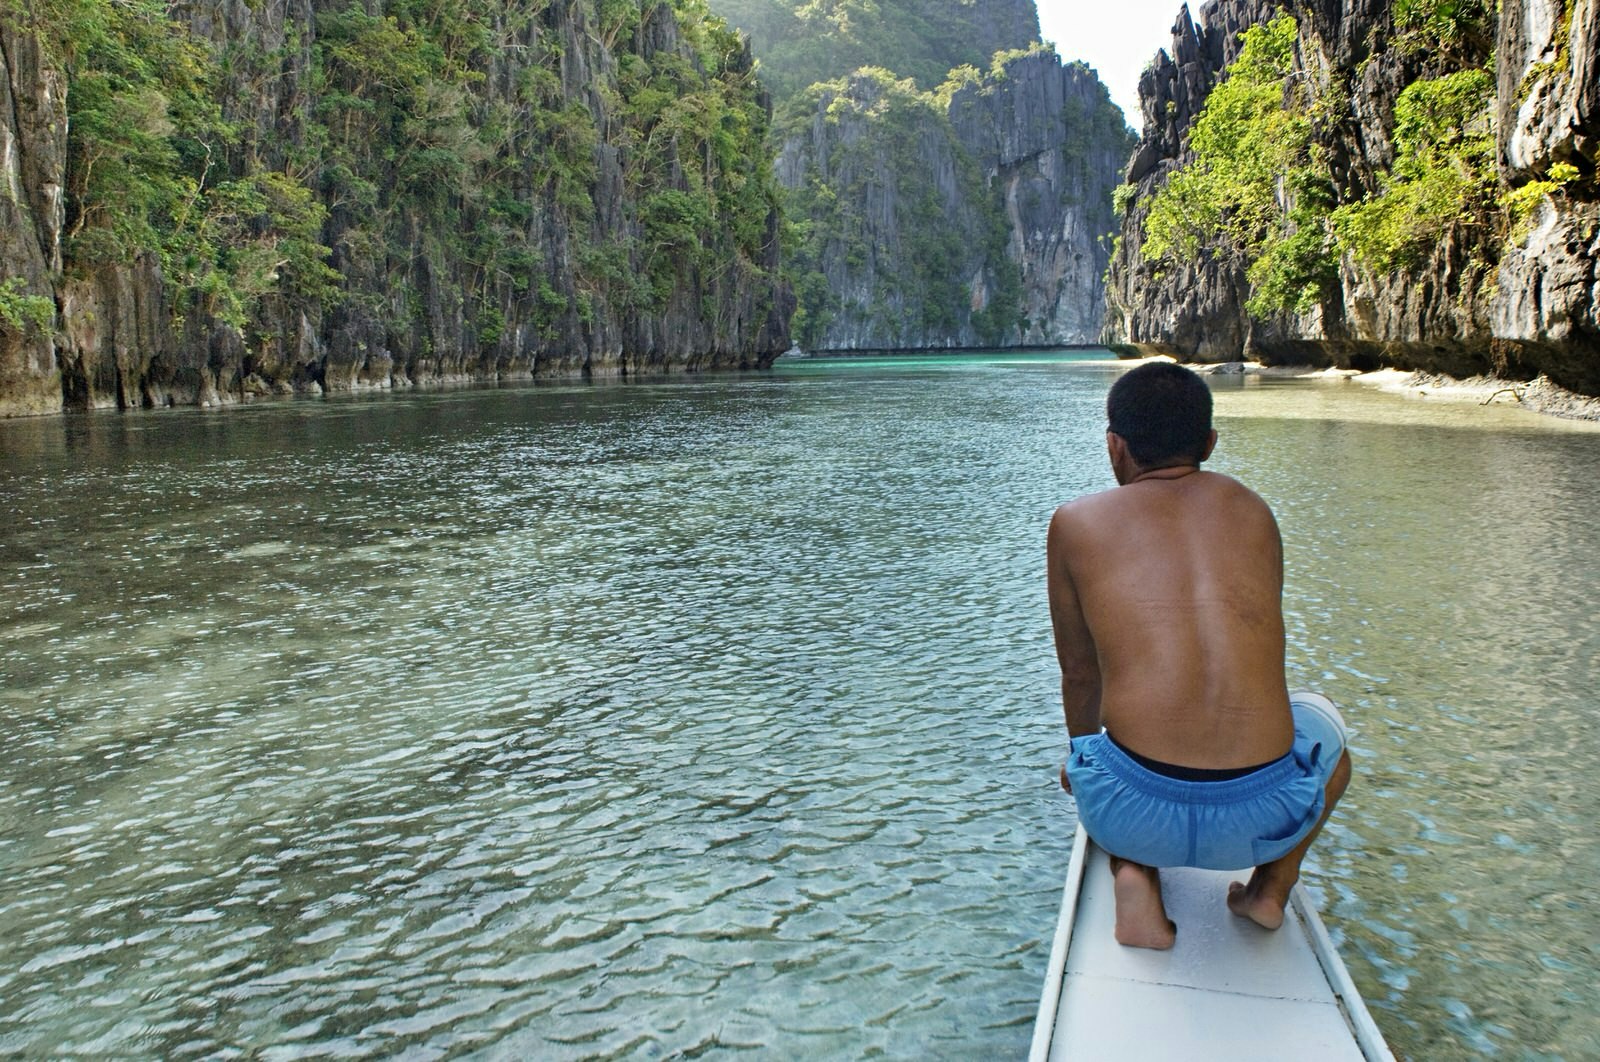 Palawan travel - EL NIDO, PALAWAN, PHILIPPINES - A canoe is heading into a hidden lagoon in Palawan archipelago. A man crouches near the top of the canoe wearing blue swimming shorts (Photo by Jonas Gratzer/LightRocket via Getty Images)